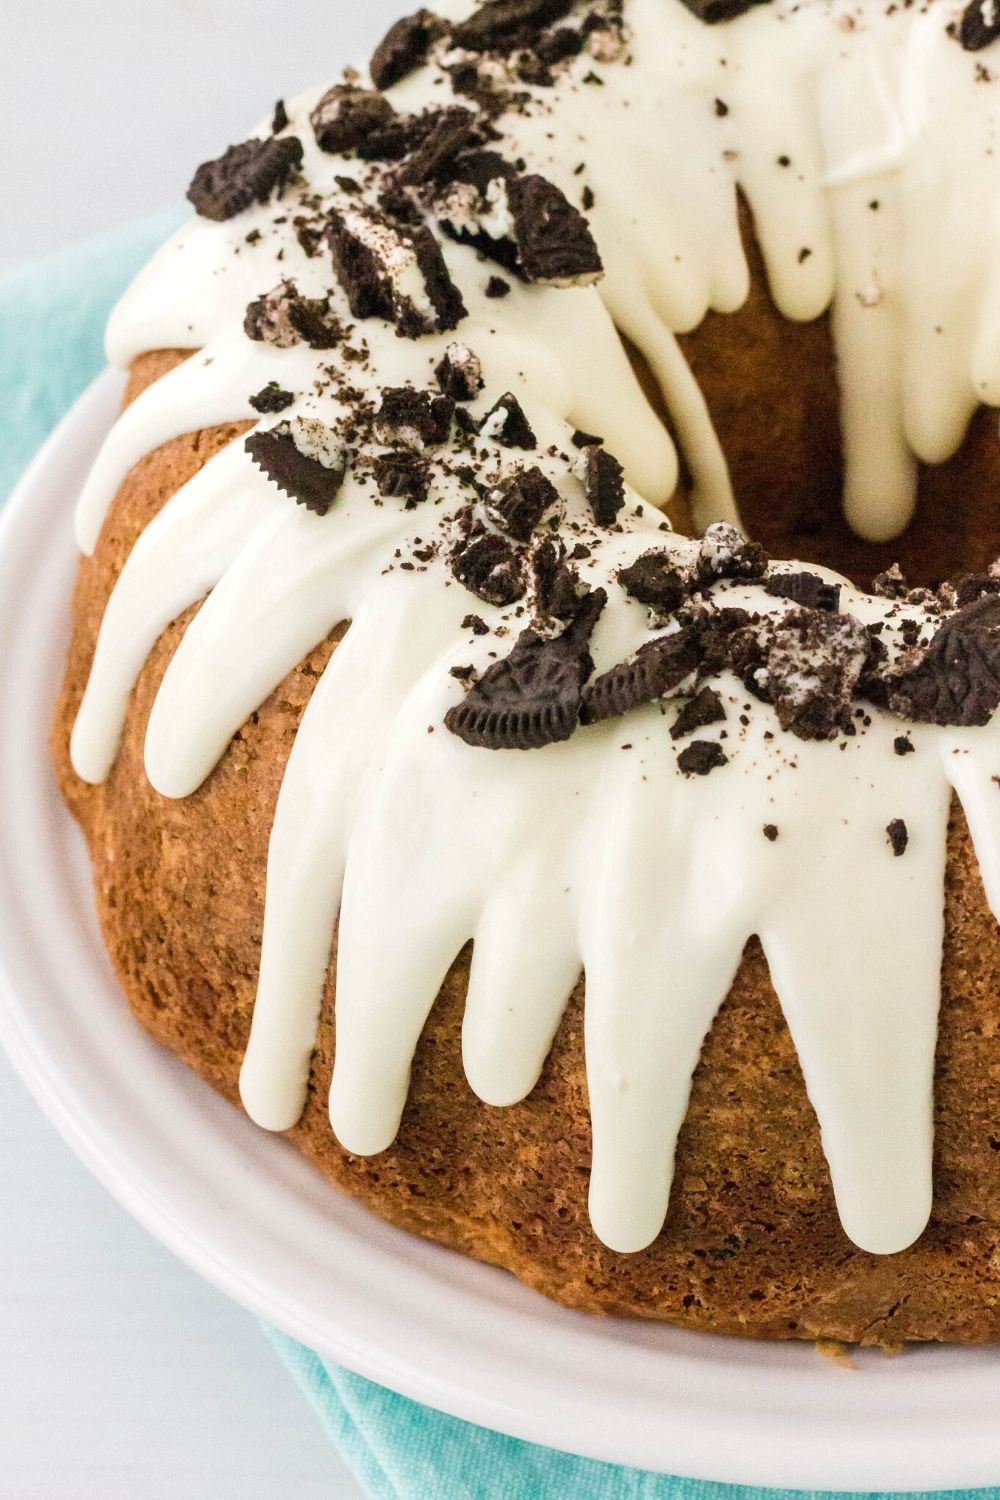 angled view of a whole cookies and cream pound cake, topped with cream cheese drizzled icing and crushed Oreo cookies